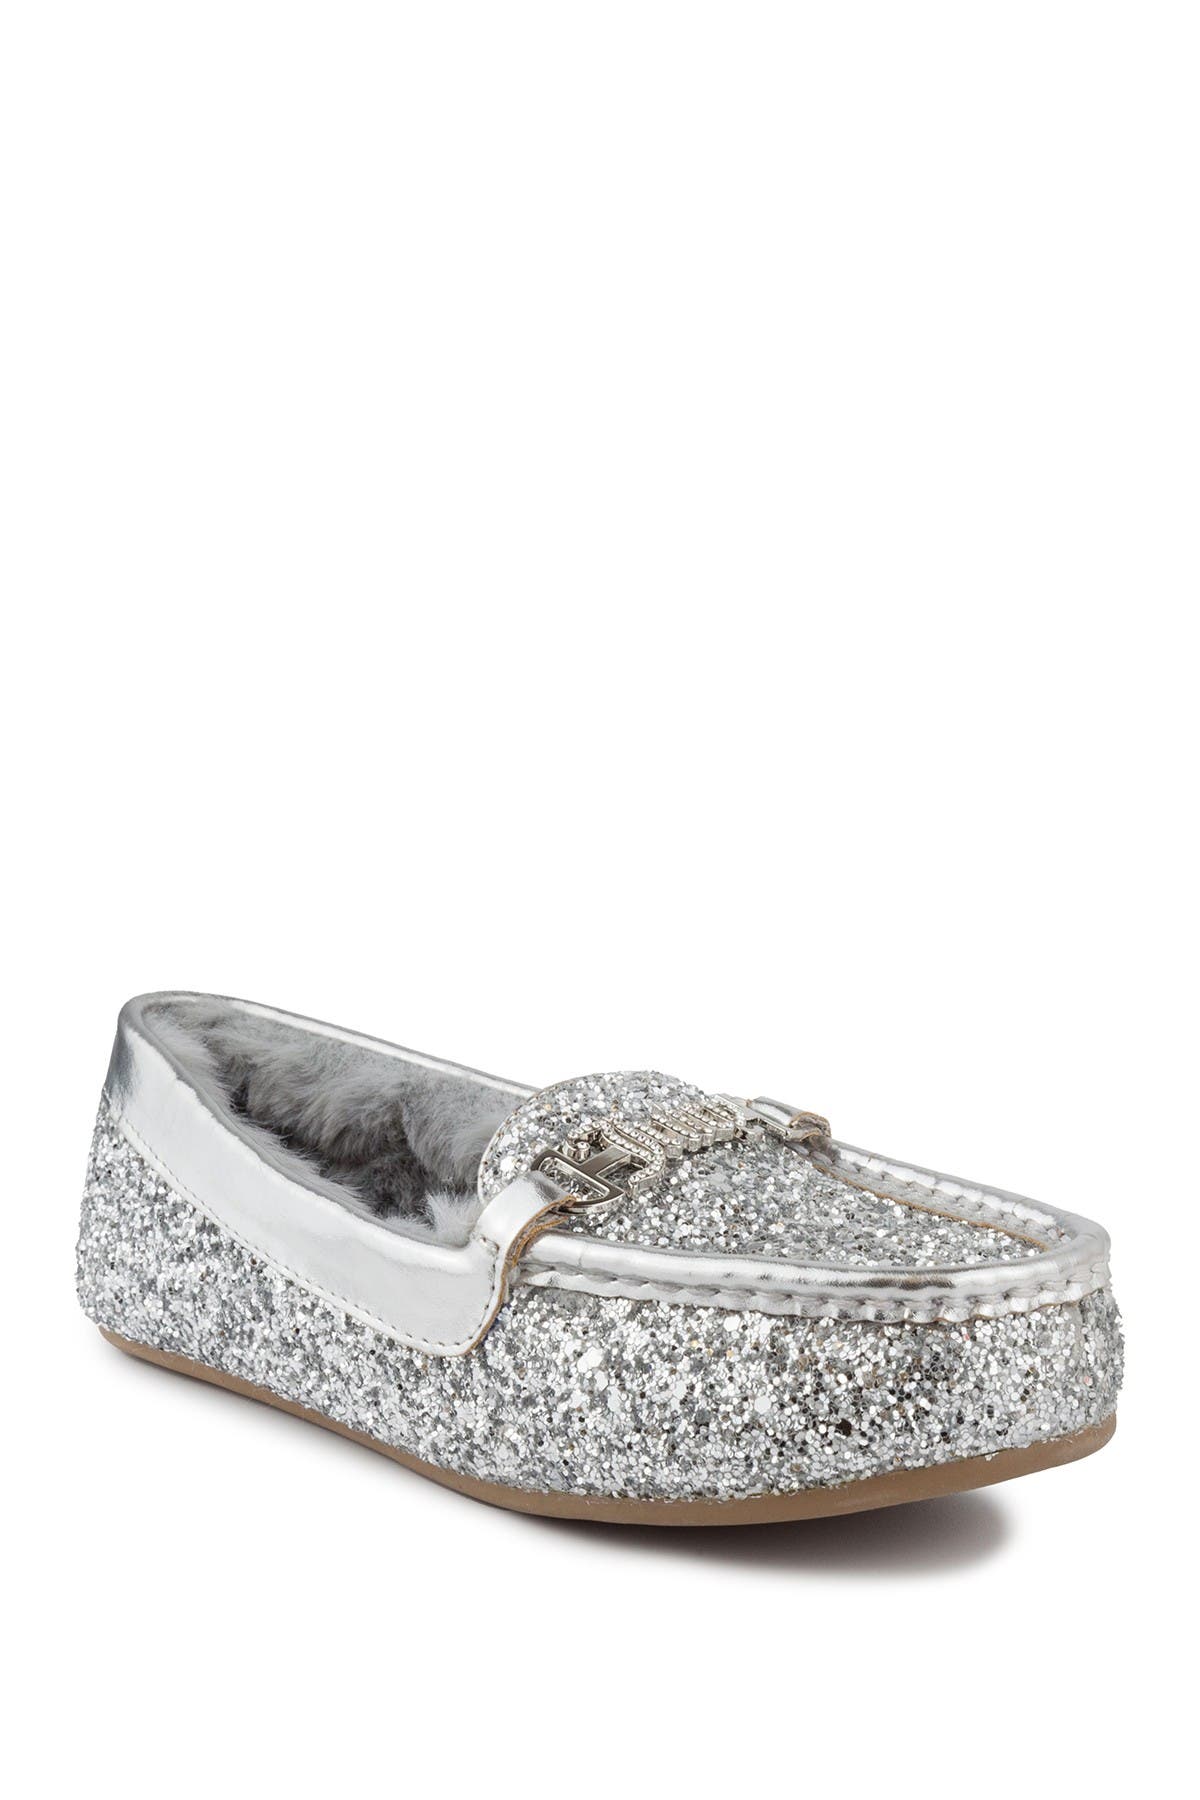 Juicy Couture INTOIT MOCCASIN